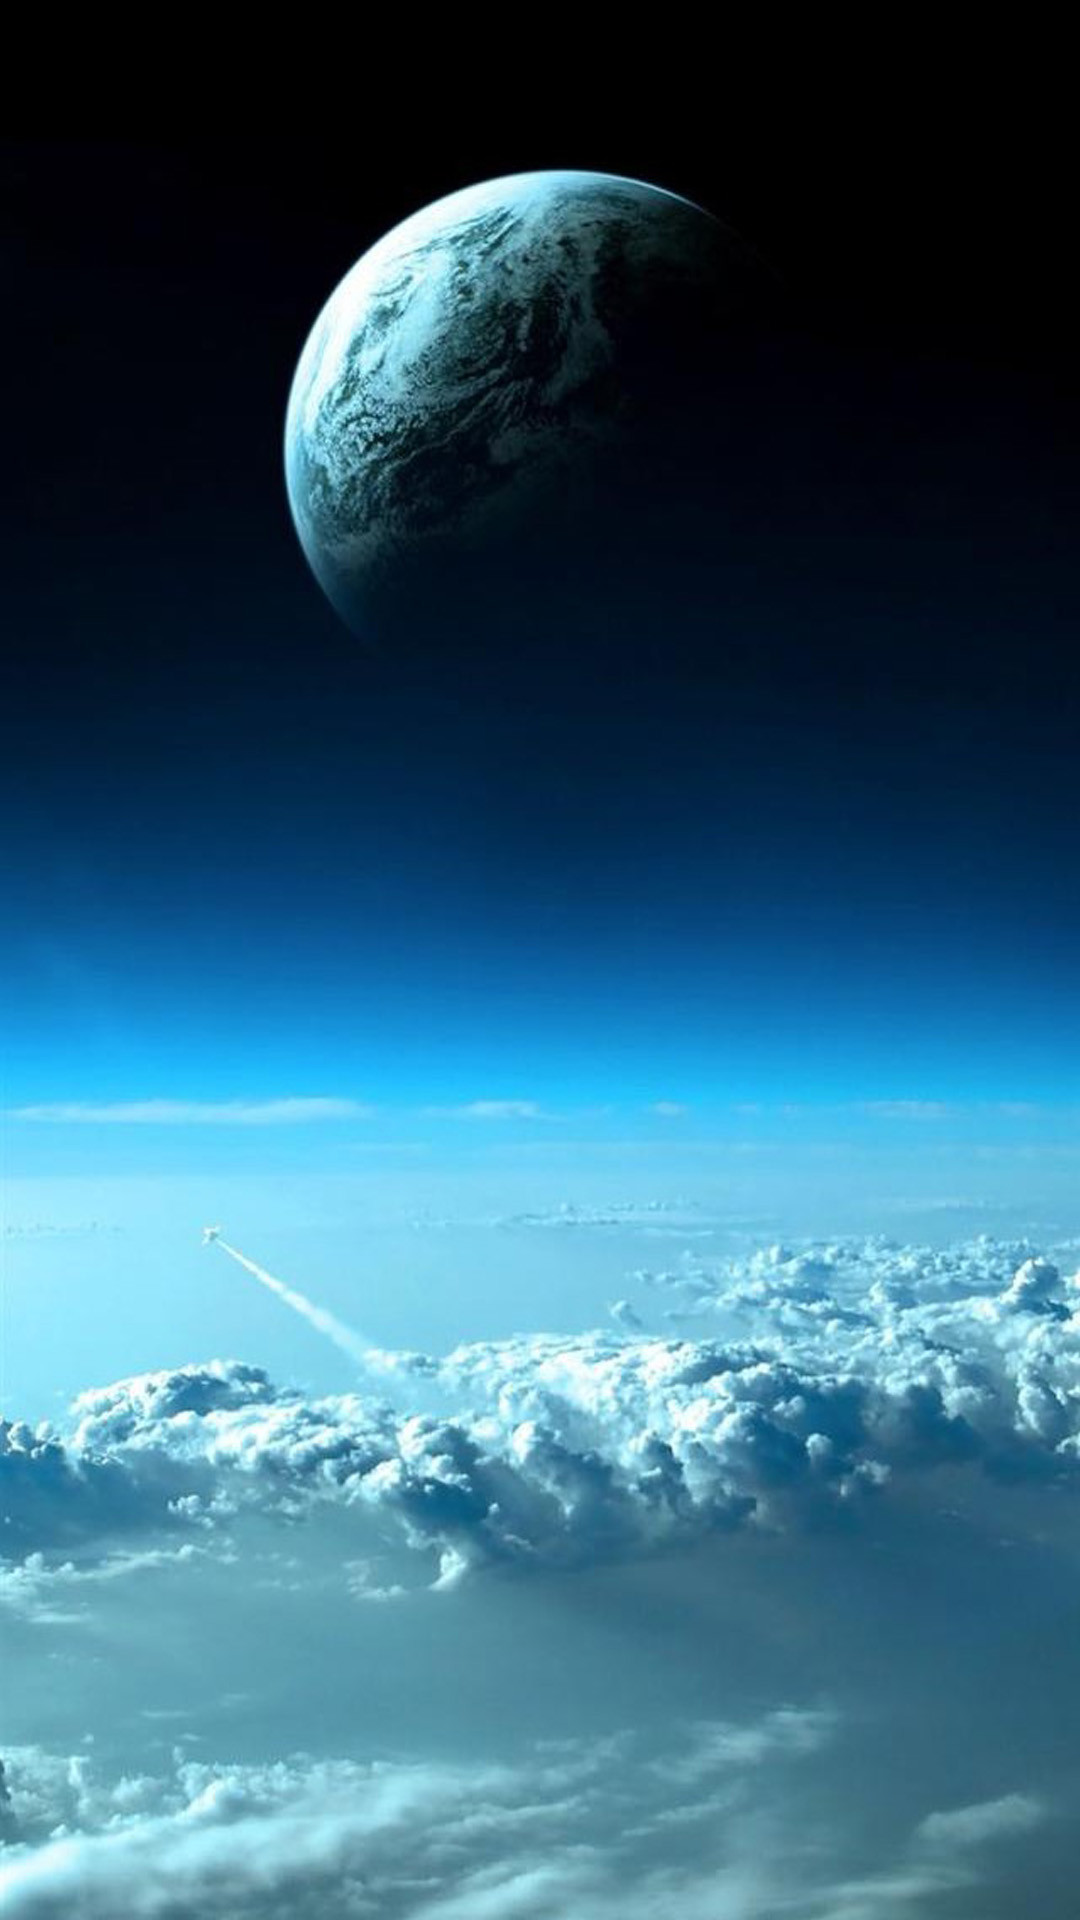 1080x1920 Ultra-HD wallpaper - Space - sky, clouds, The rocket, space, the planet -